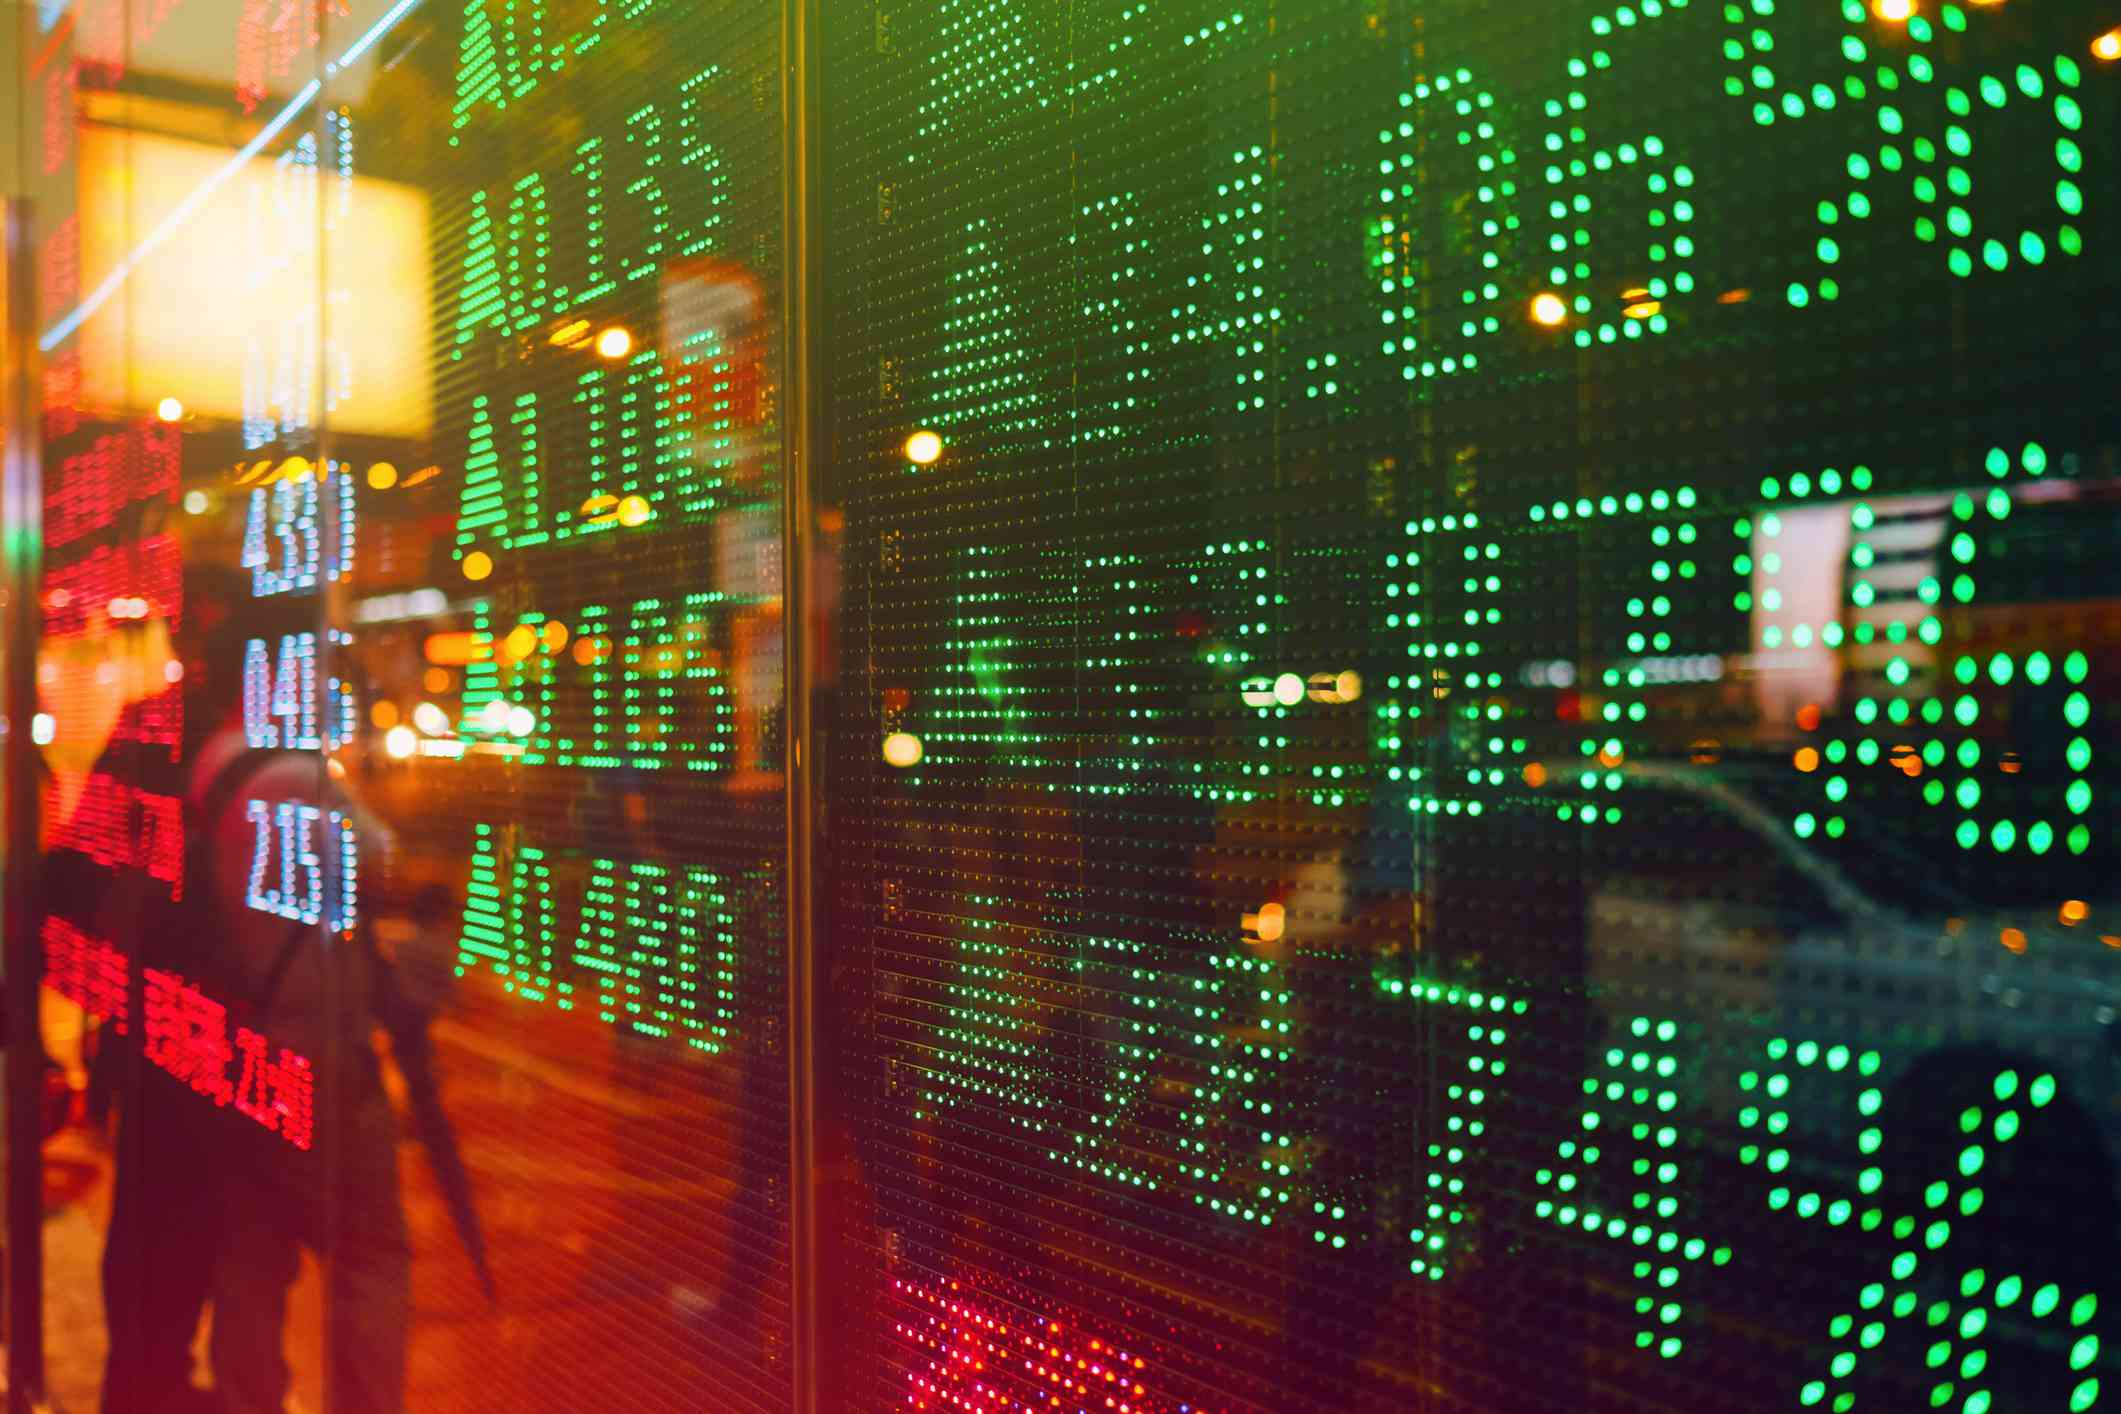 Stock exchange market display screen board on the street showing stock rises in green color.